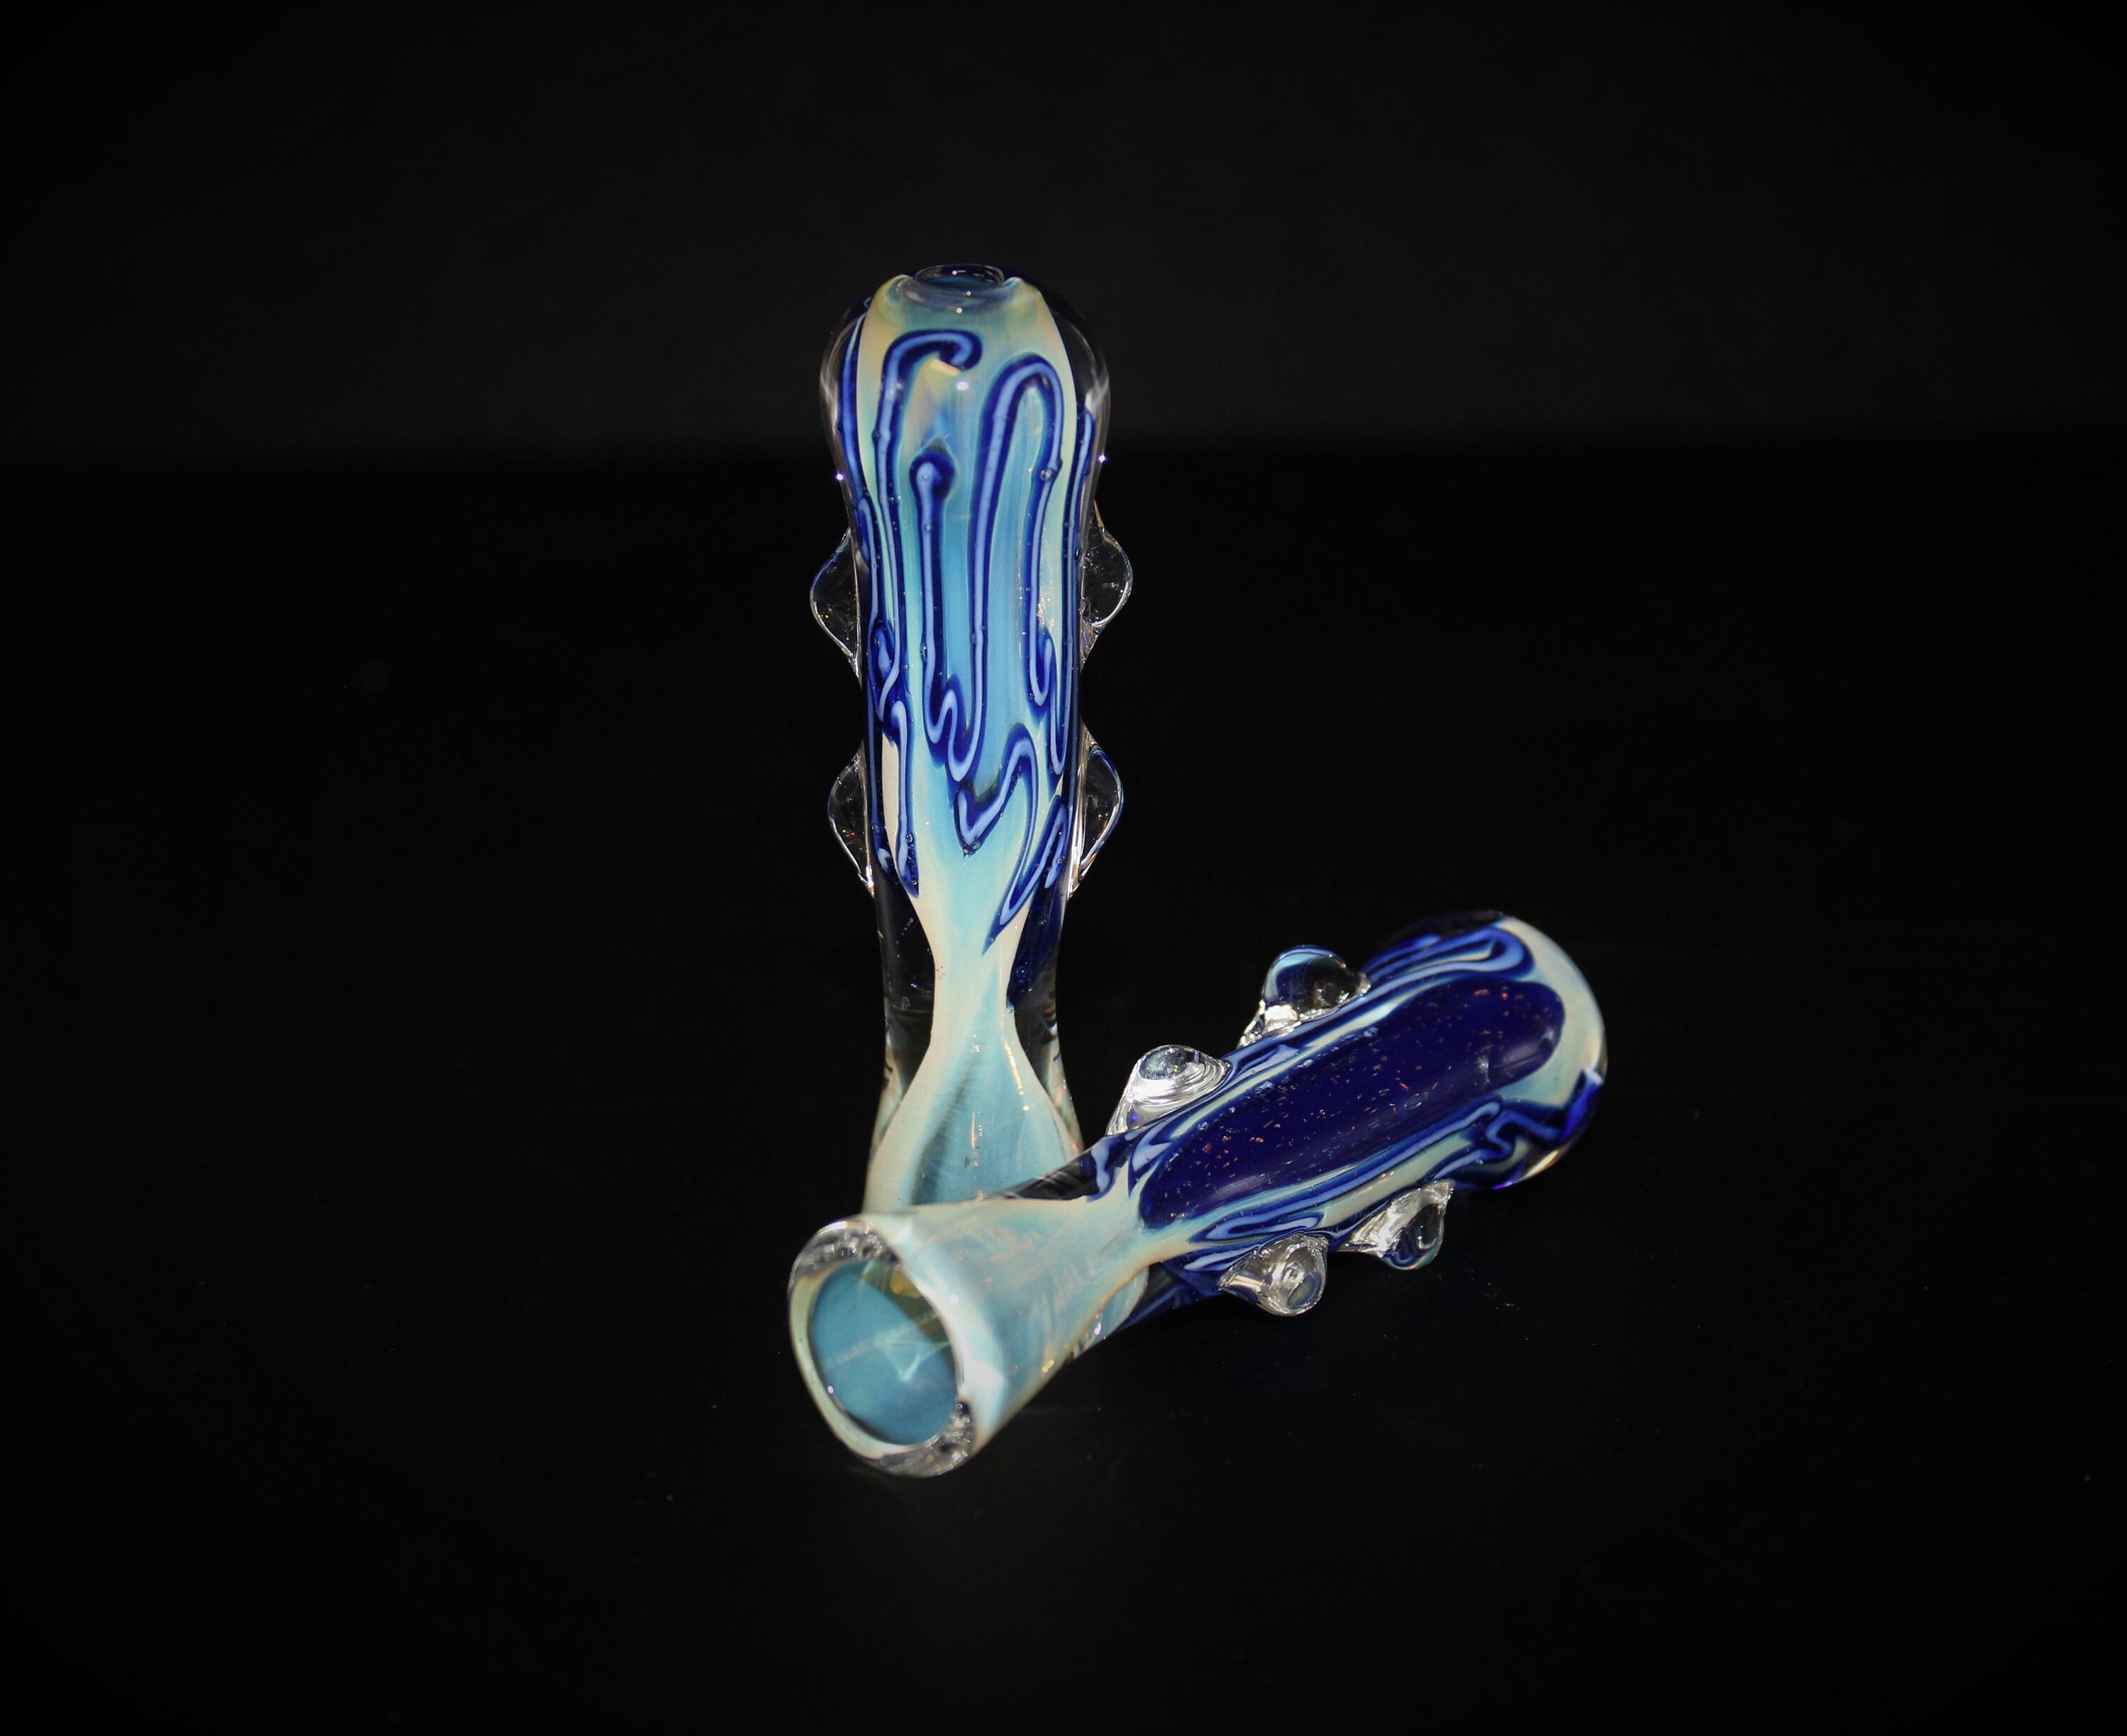 4 1/2 ZIGGY SQUARE STEM Smoking Glass Pipe THICK GLASS pipes – The Hippie  Momma Shop